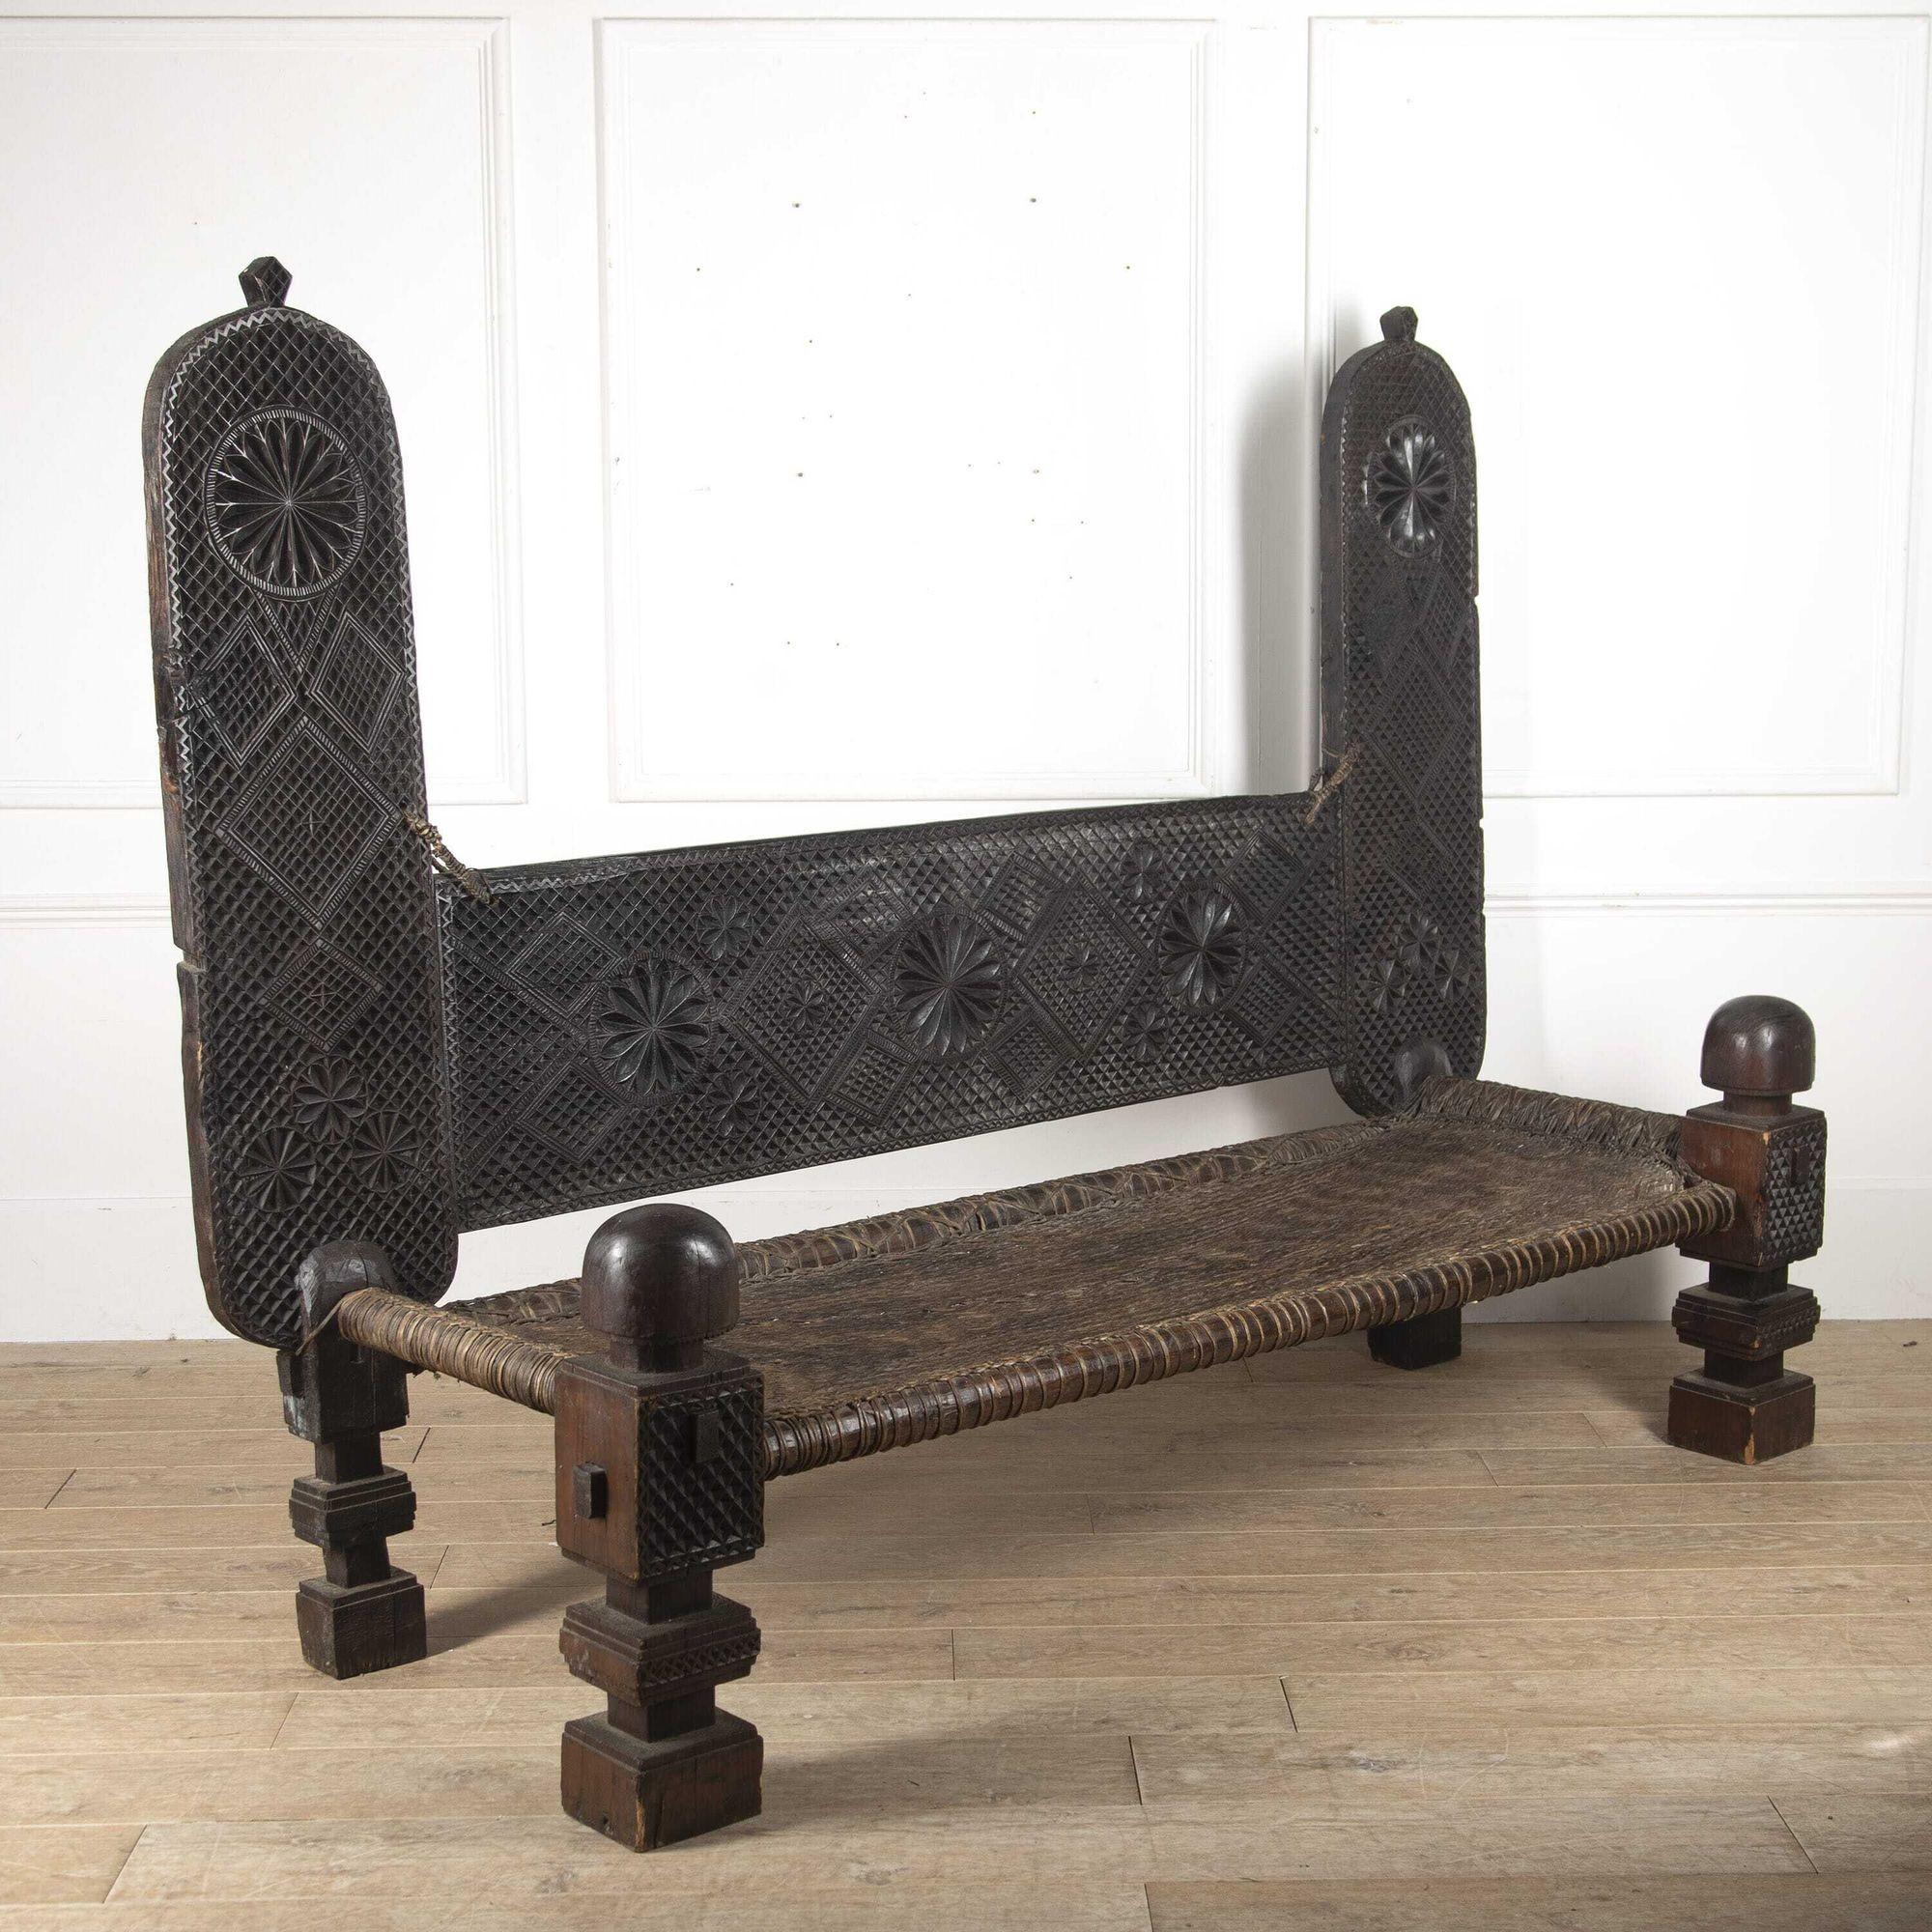 Impressive oversized daybed originating from the East African Swahili coast.
This unusual daybed is constructed of geometrically carved panels and oversized legs, that are held together by strips of animal hide, bound, and woven to form the bed